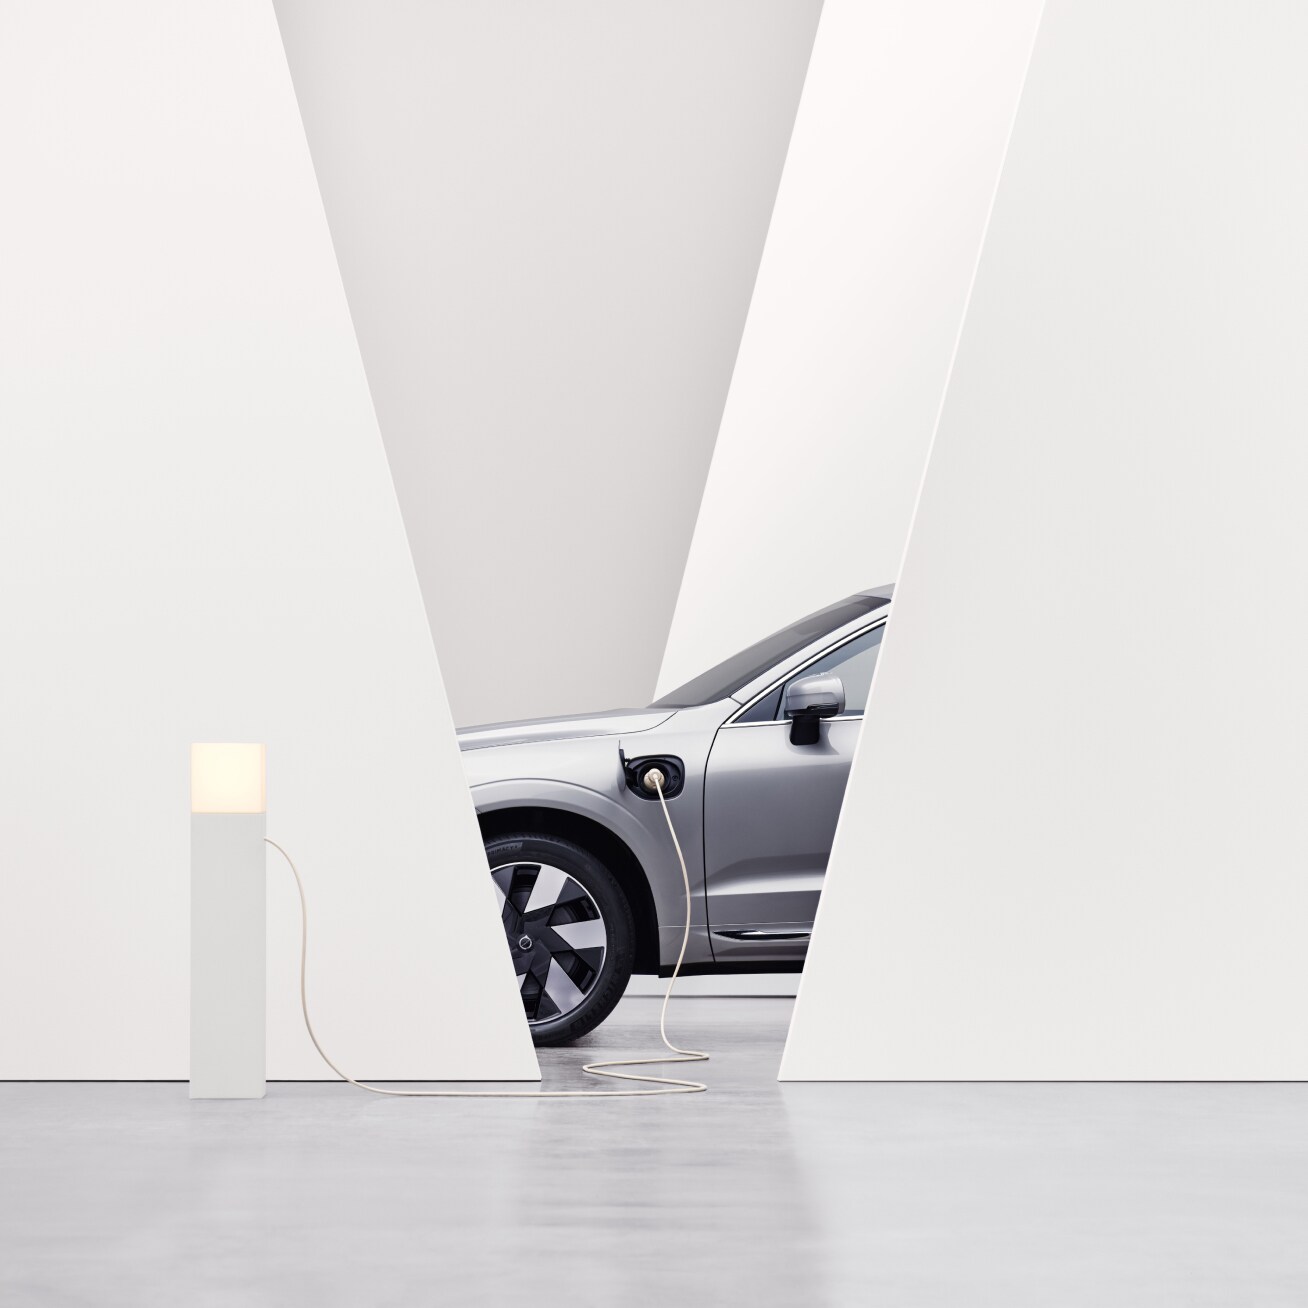 Partial view of Volvo seen from side in white interior environment charging at charging post